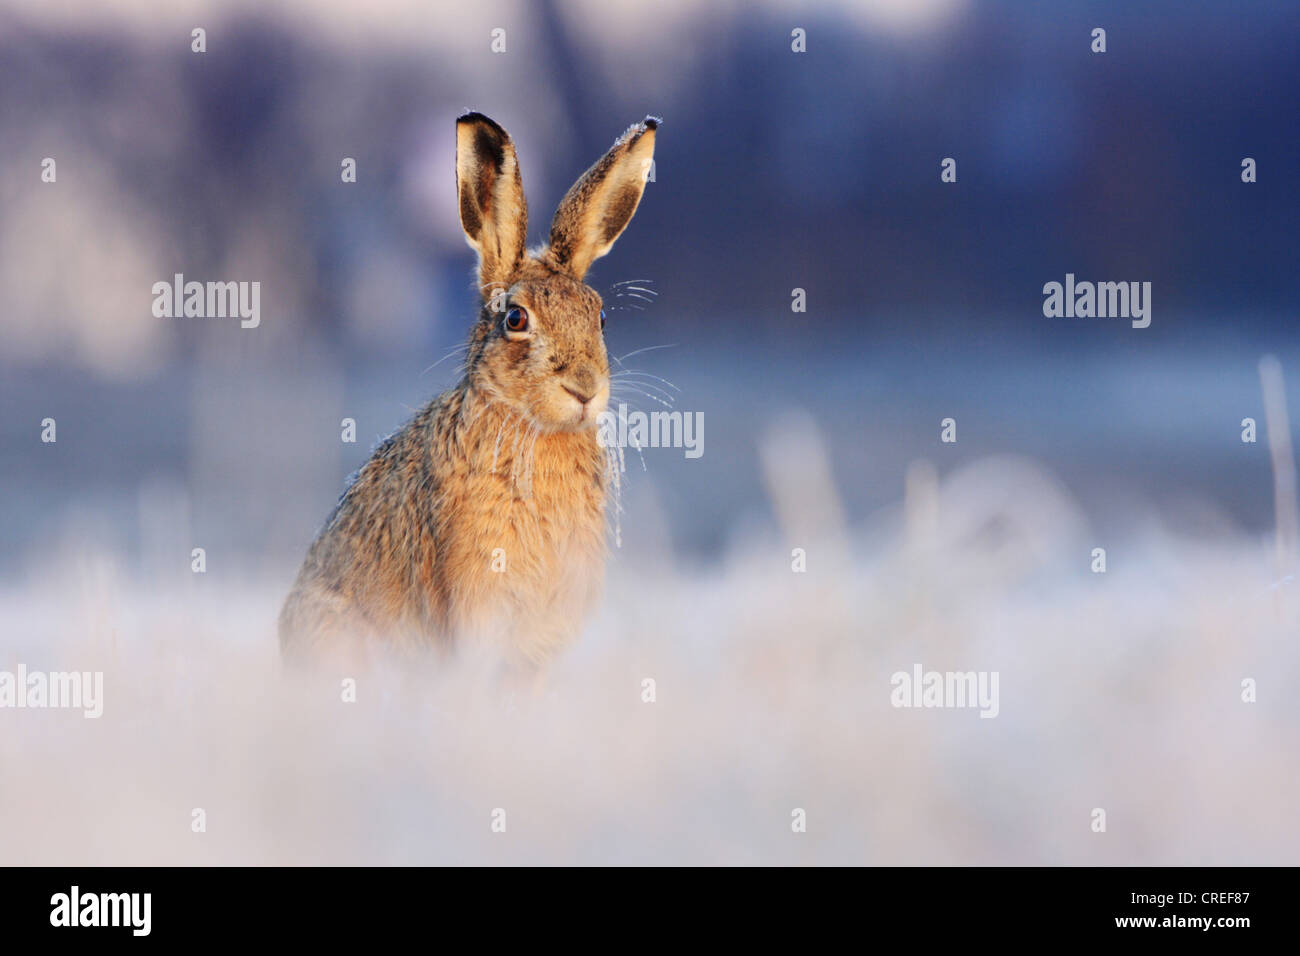 European hare (Lepus europaeus), sitting on a meadow with hoar frost; hoar frost on its'ears and whiskers, Germany, Bavaria Stock Photo